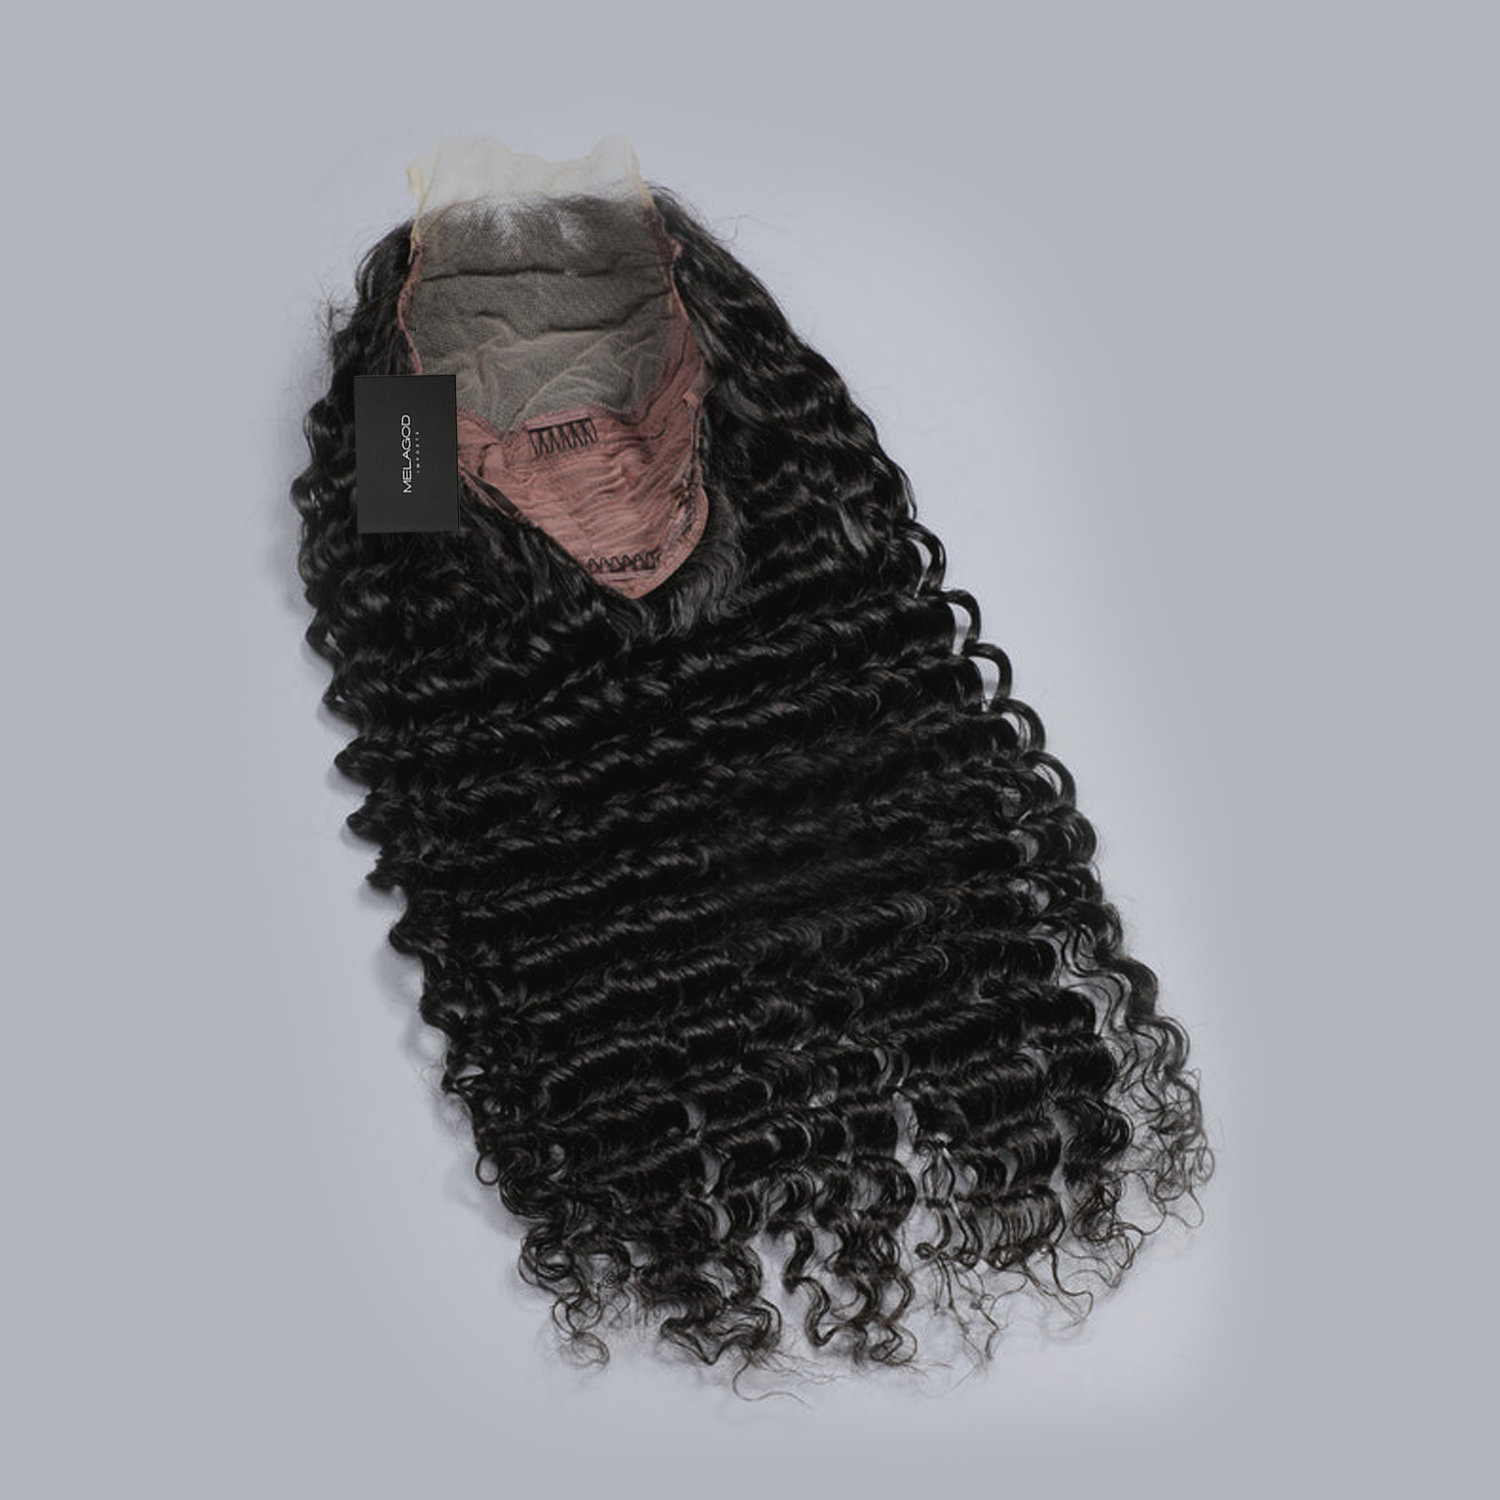 Adjustable Straps & Combs: Tailor your wig to comfort with adjustable straps and combs, ensuring a secured glue less unit all day long. Generous Parting Space: Enjoy versality in styling with ample parting space, allowing you to suit your unique styling preferences. MelaGod Imports